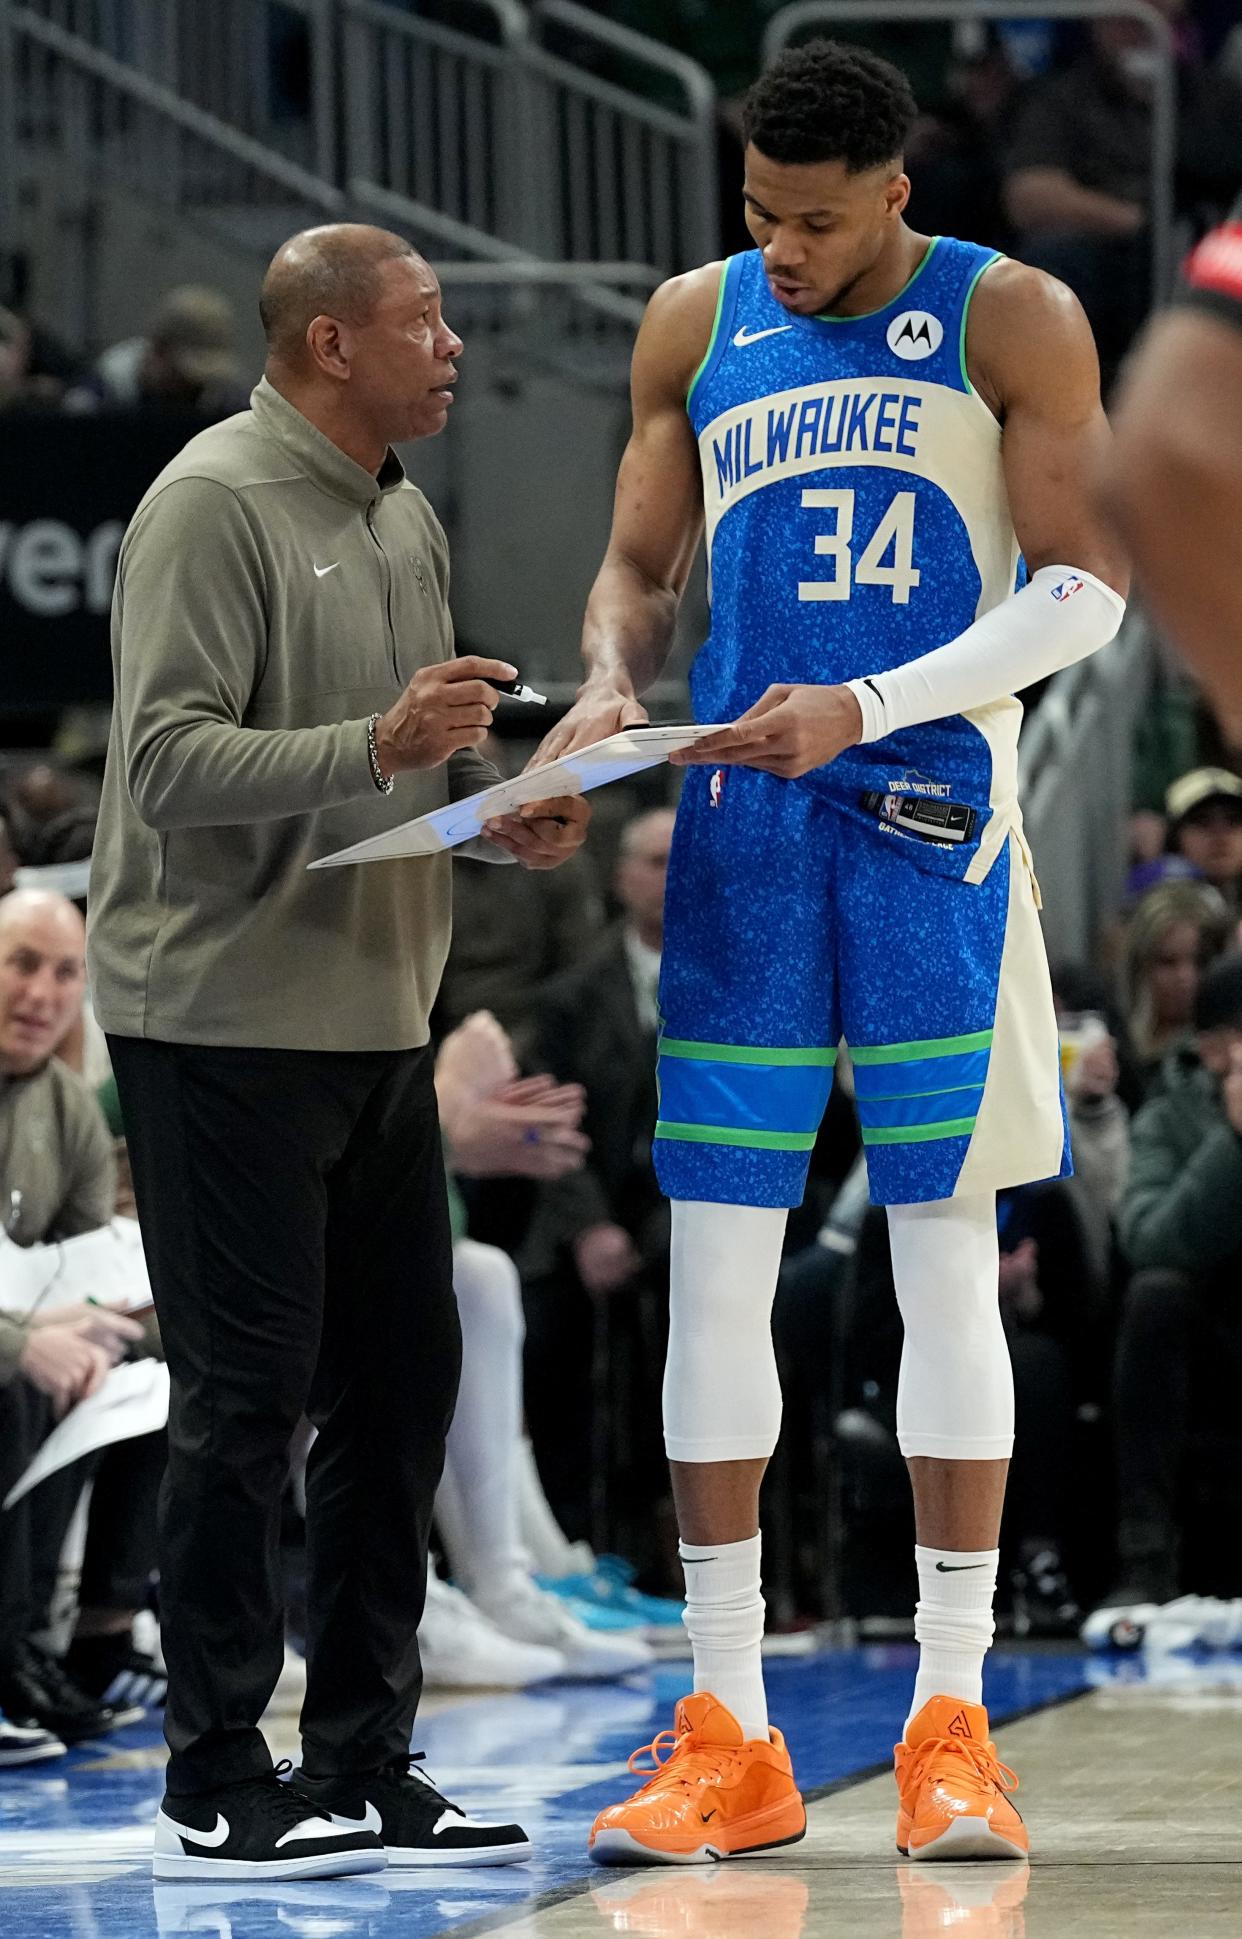 Doc Rivers has been thinking about new ways to use Bucks superstar Giannis Antetokounmpo.